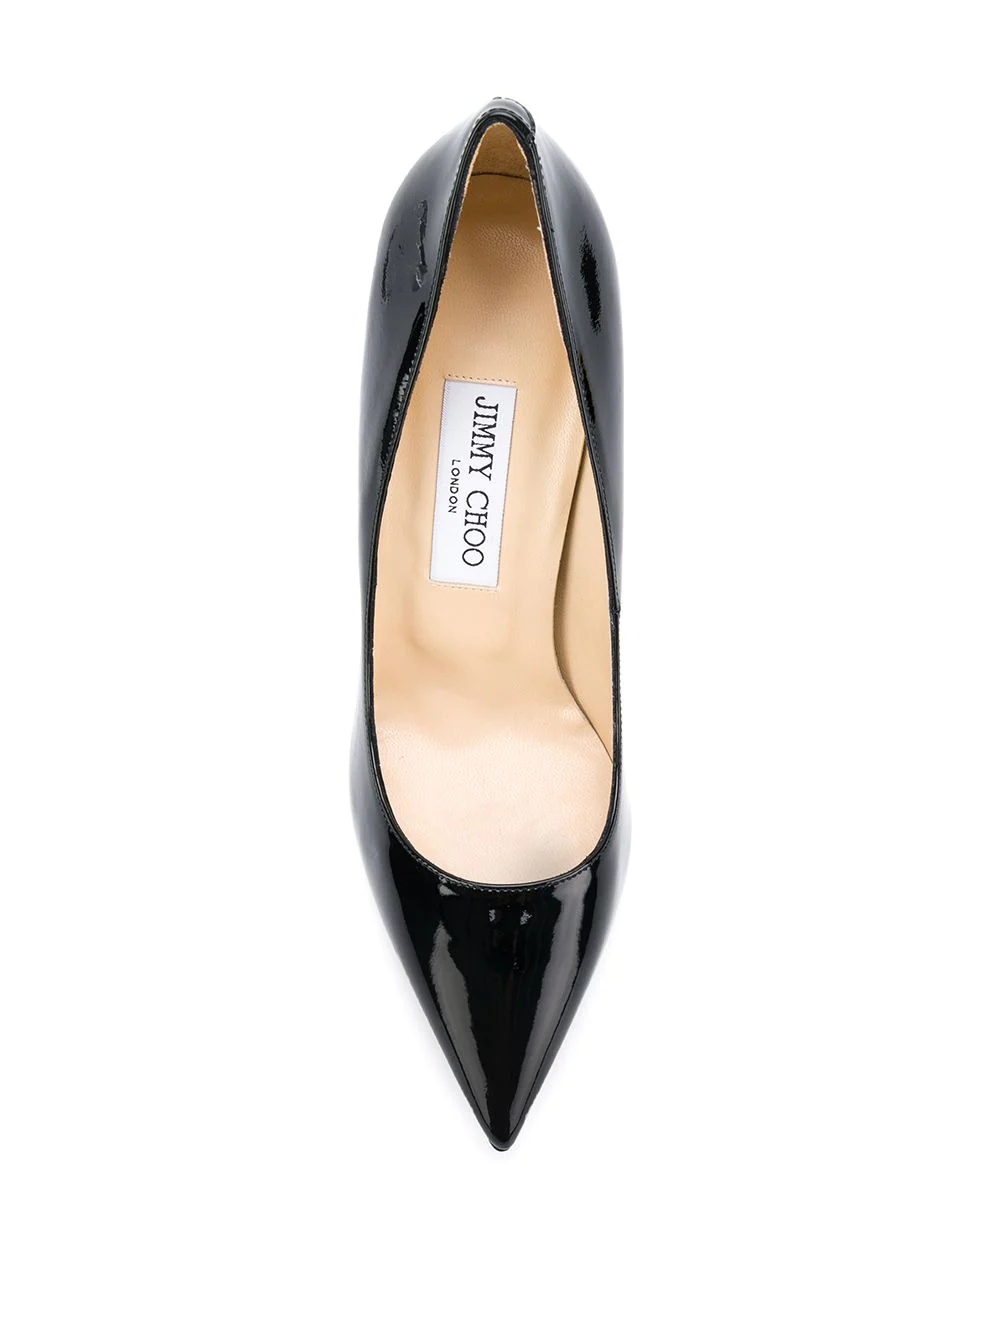 Anouk pointy pumps - 4